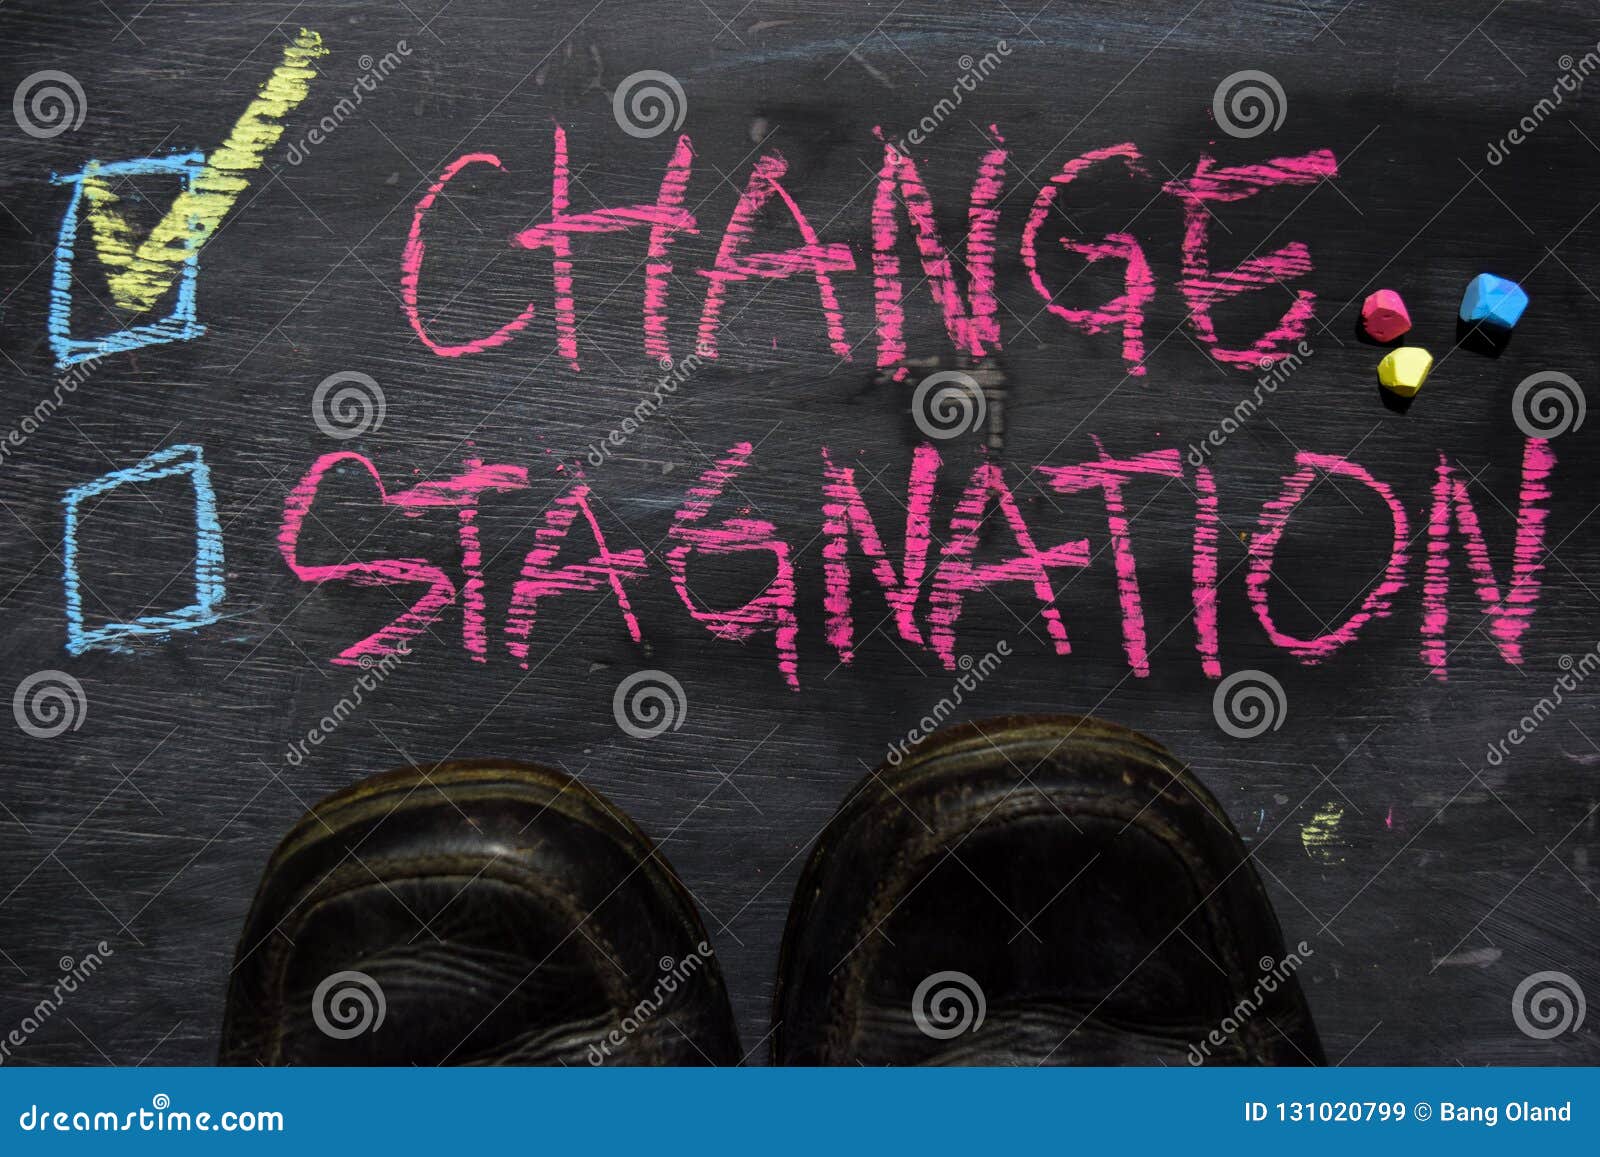 change or stagnation written with color chalk concept on the blackboard